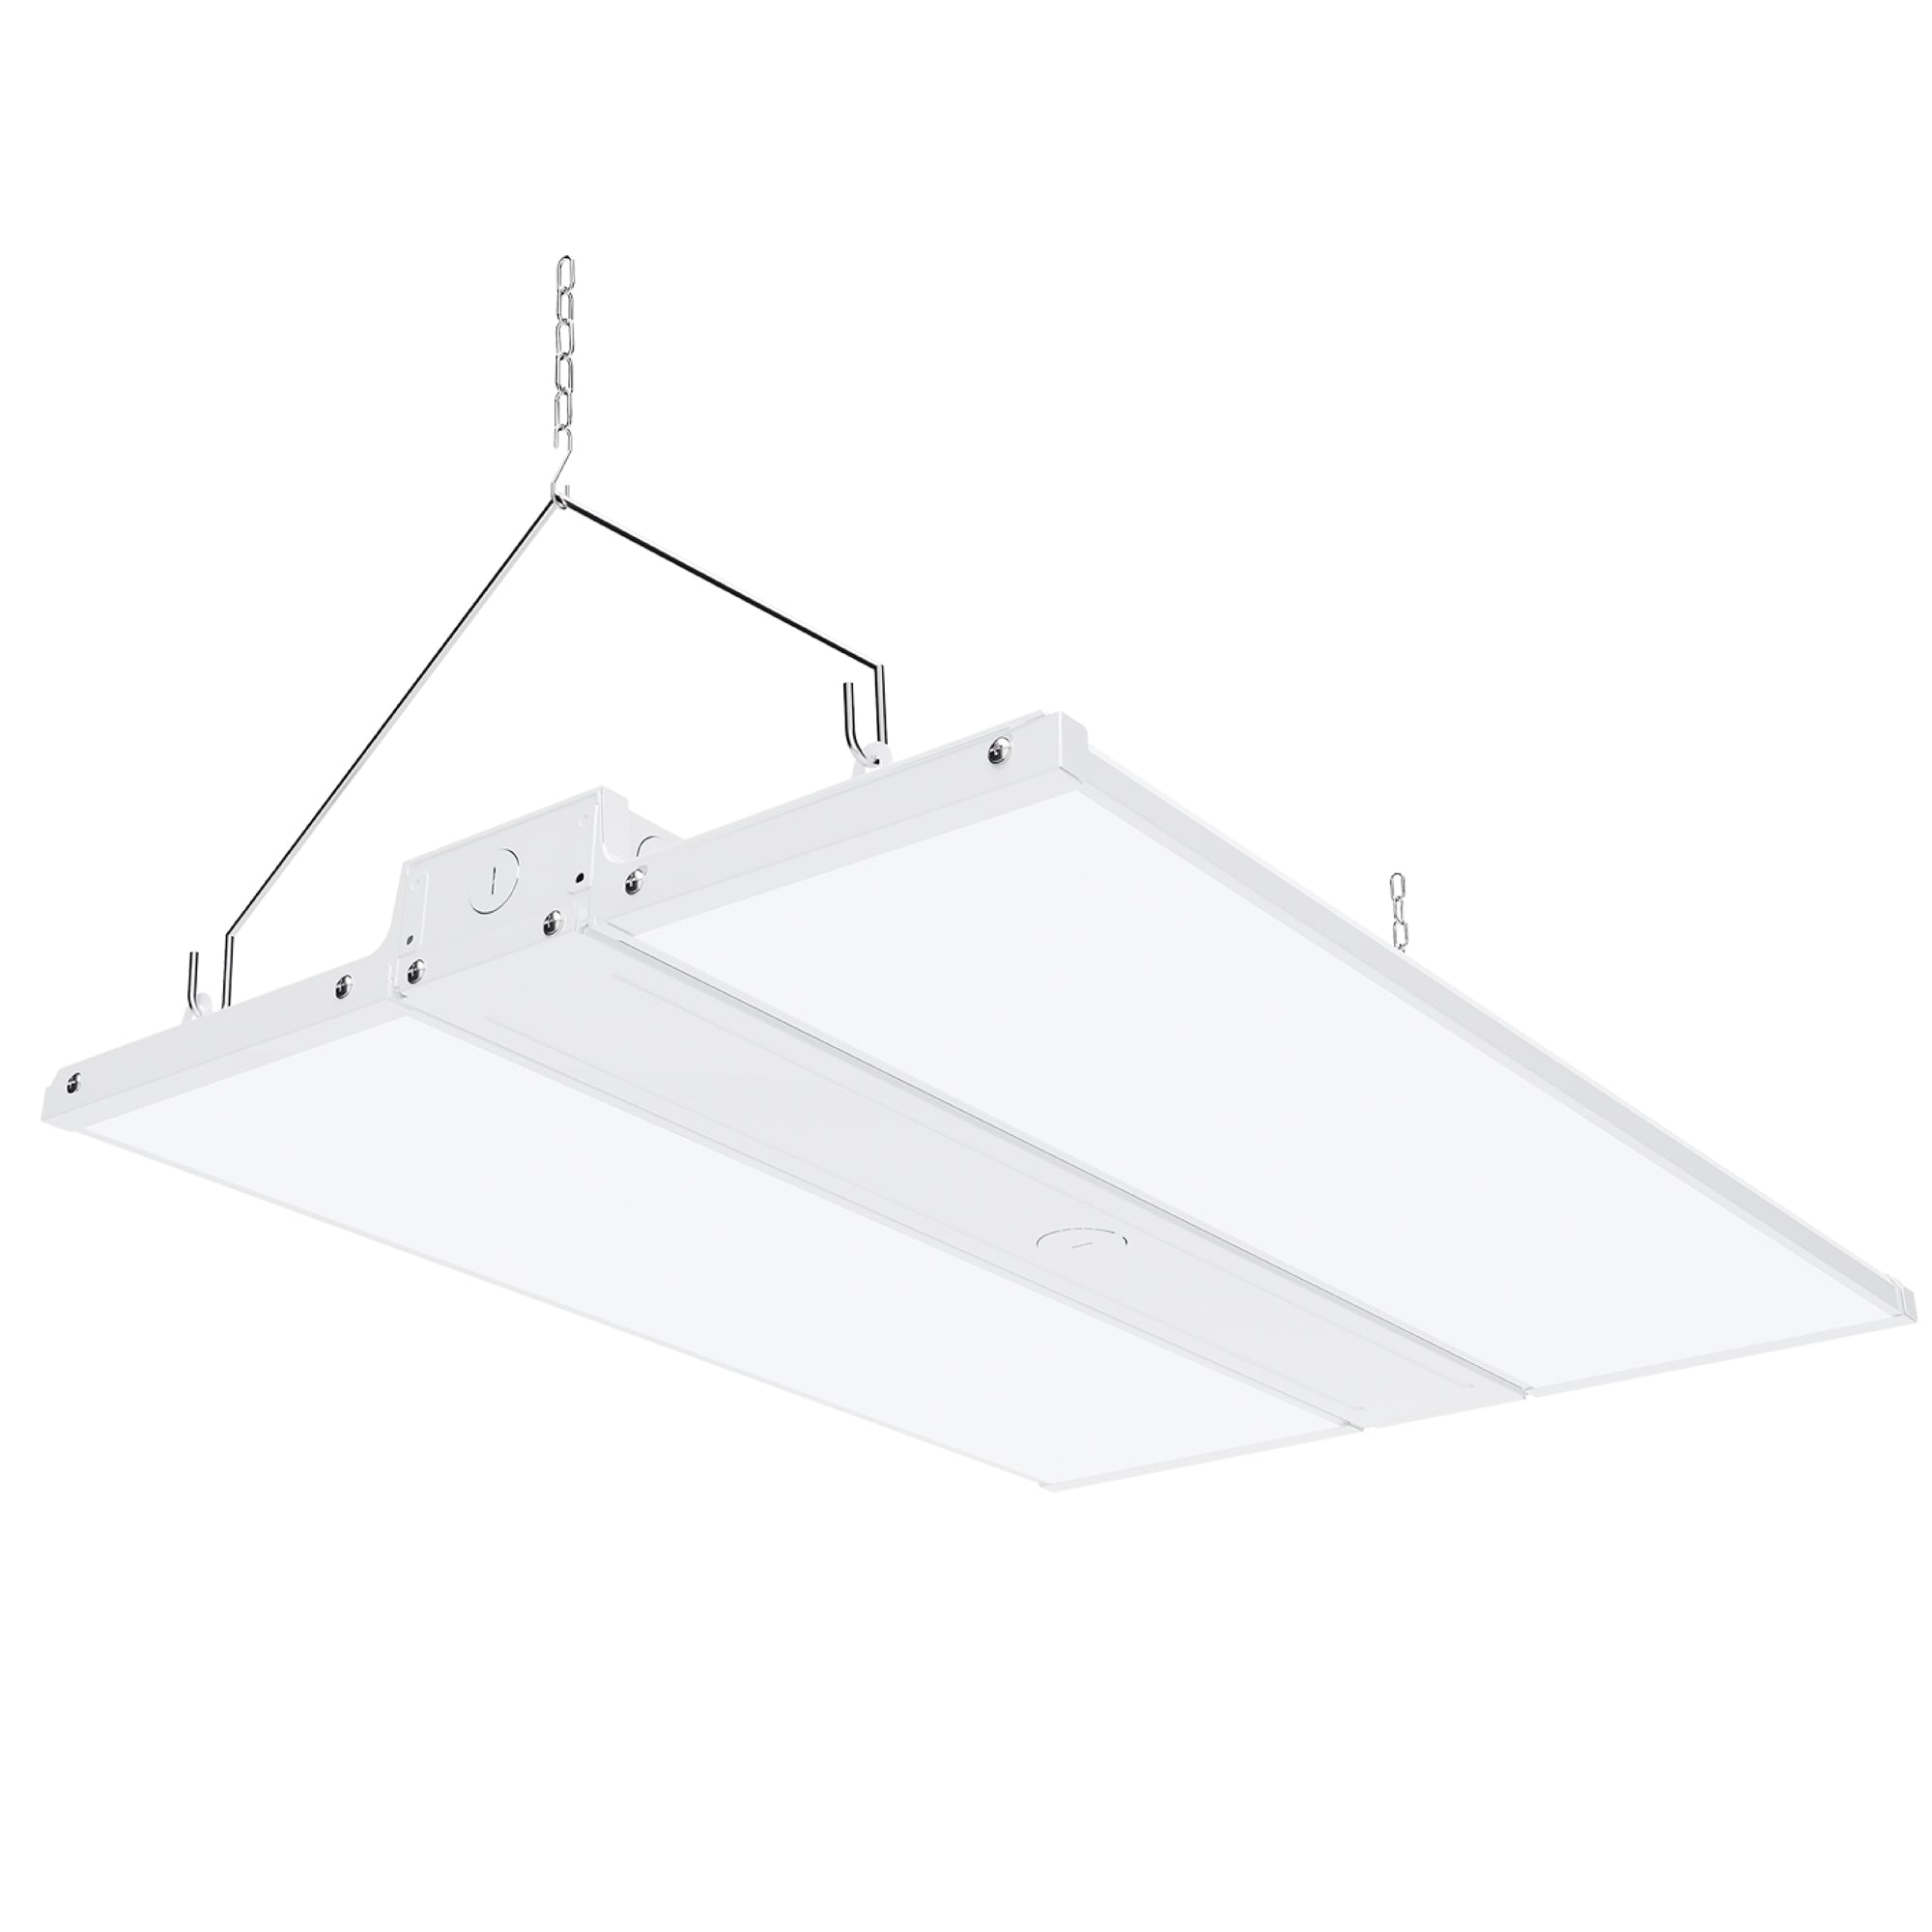 Dimmable 220W LED Linear High Bay from Sunco Lighting is 2 feet long and offers instant on, bright light for warehouse, gymnasium, workshop or industrial space. This 30800 lumen area light comes with chains for hanging high bay light fixture. The 220W LED is a 800W equivalent with a beam spread of 38ft to 72ft. The fixture is UL listed and FCC certified. Dim via 1-10V dimming.